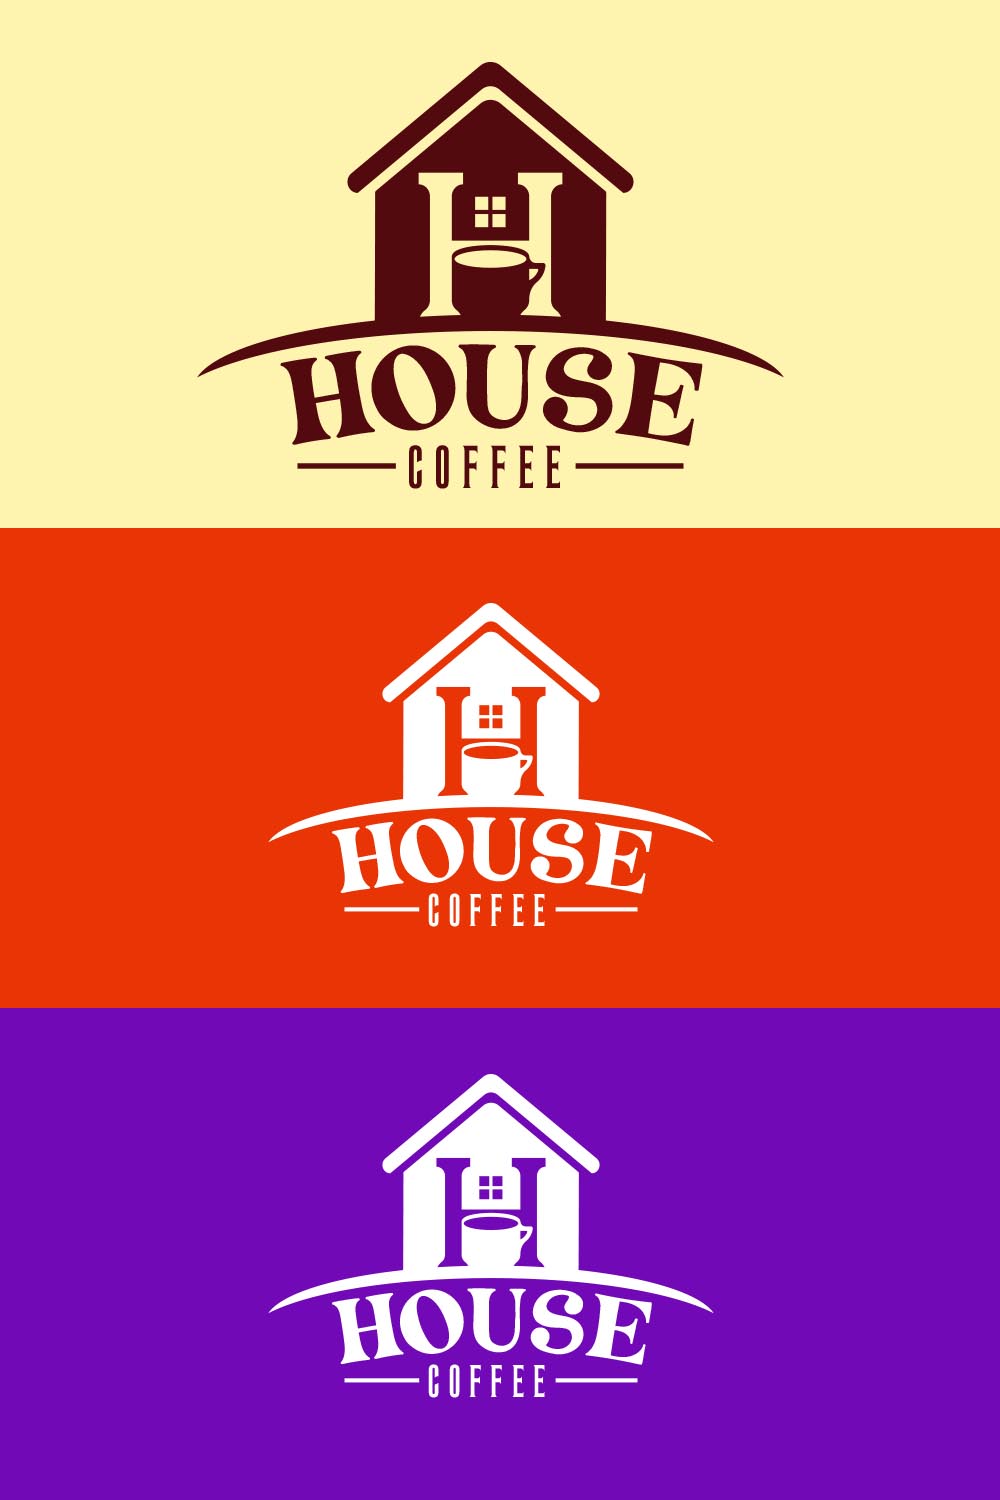 Perfect House Coffee Logo Design Pinterest collage image.